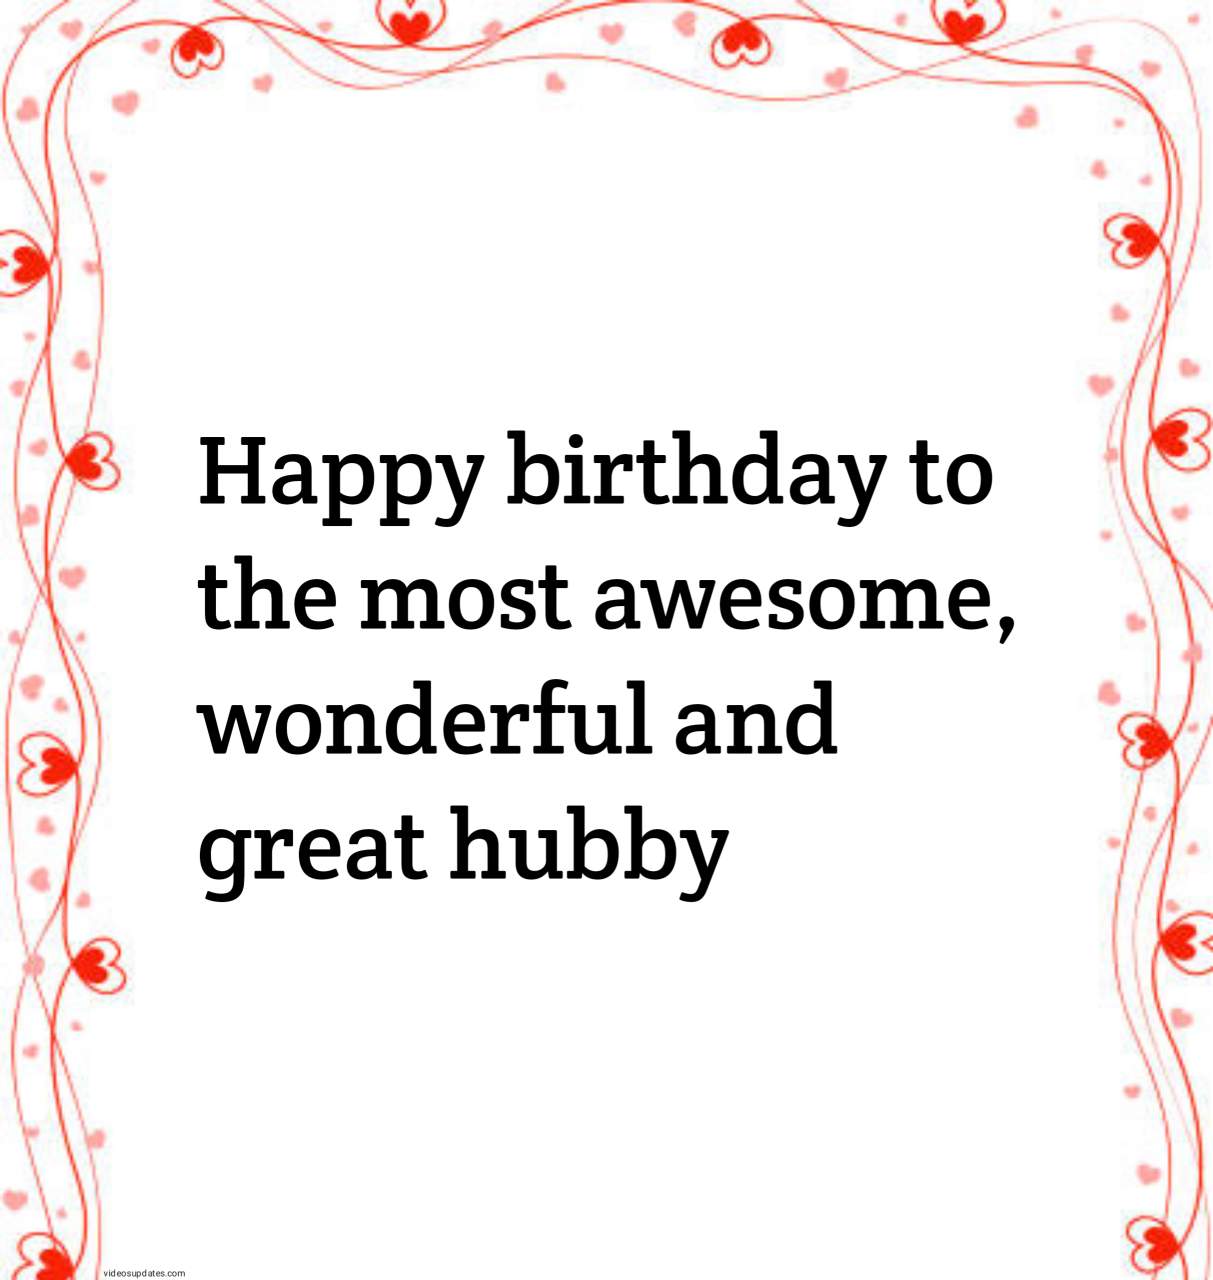 https://videosupdates.com/birthday-wishes-for-husband-for-success/